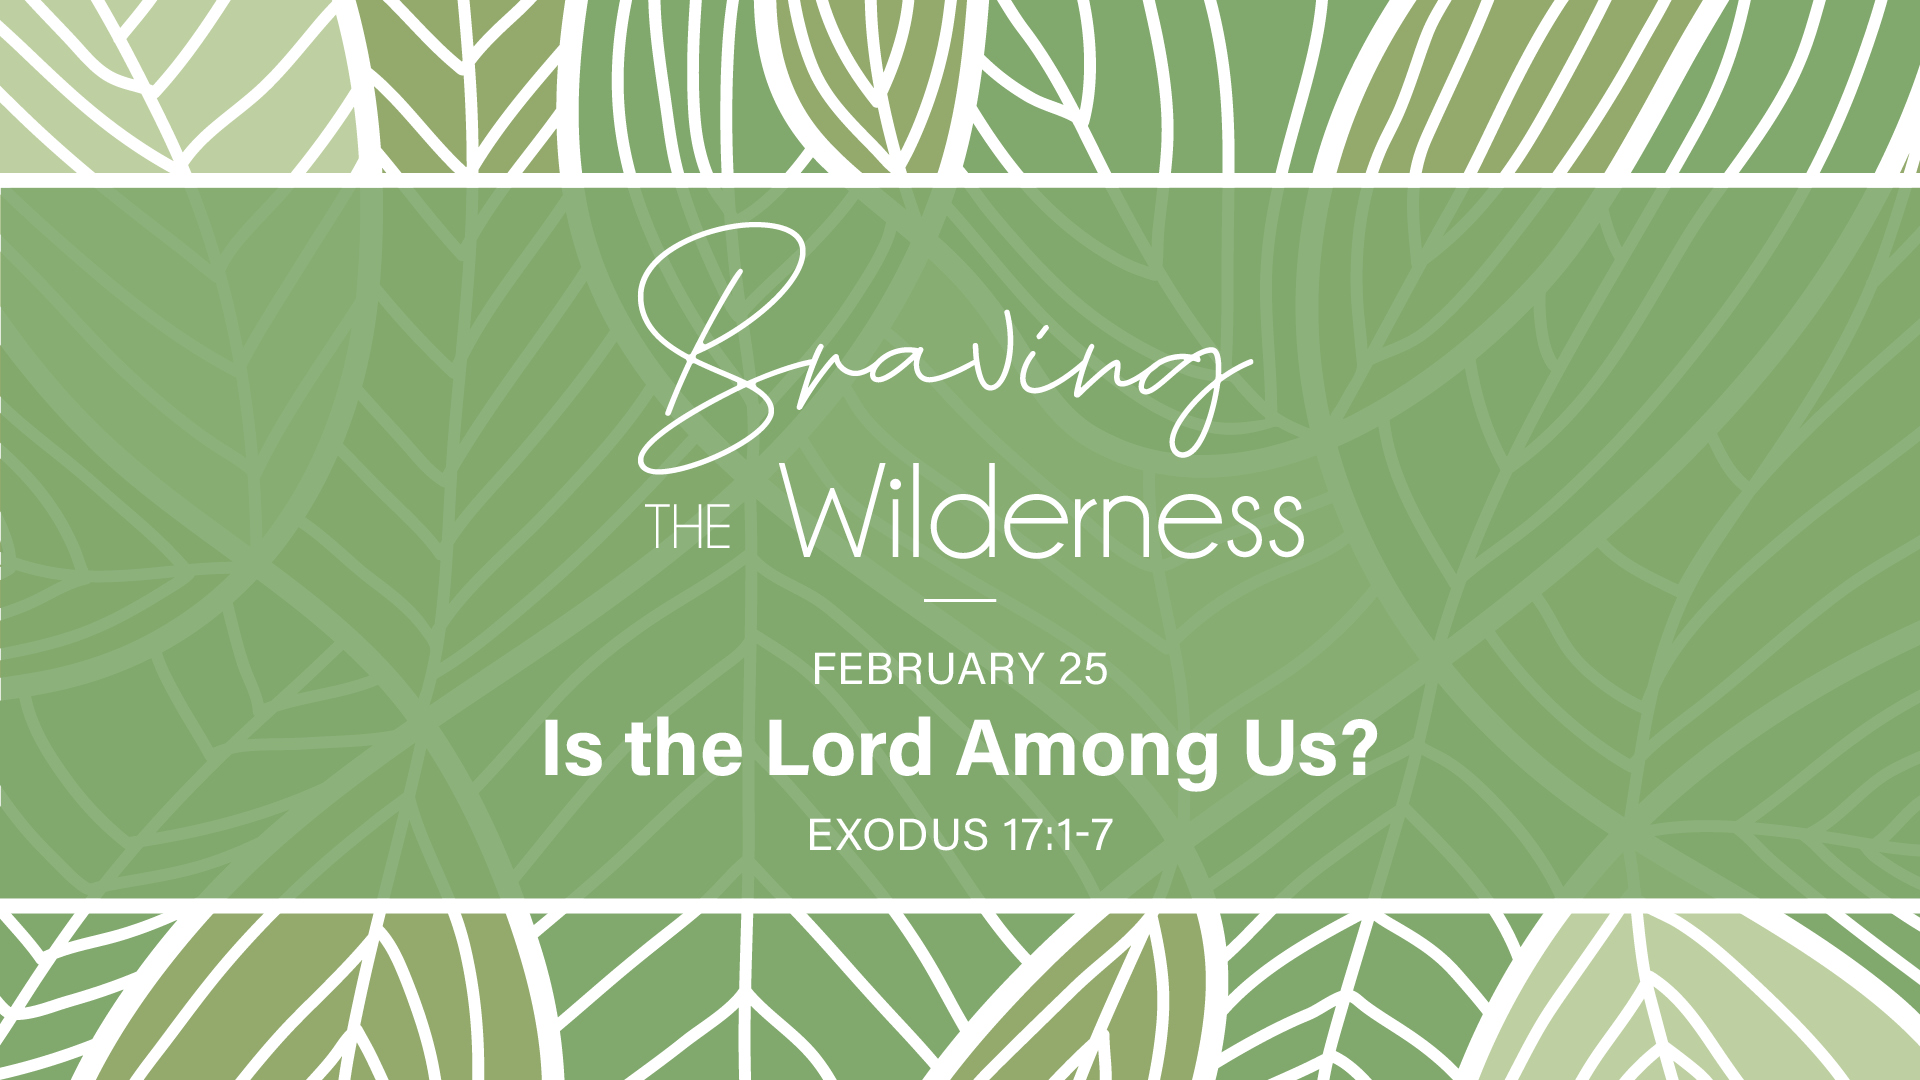 Braving the Wilderness: Is the Lord Among Us?